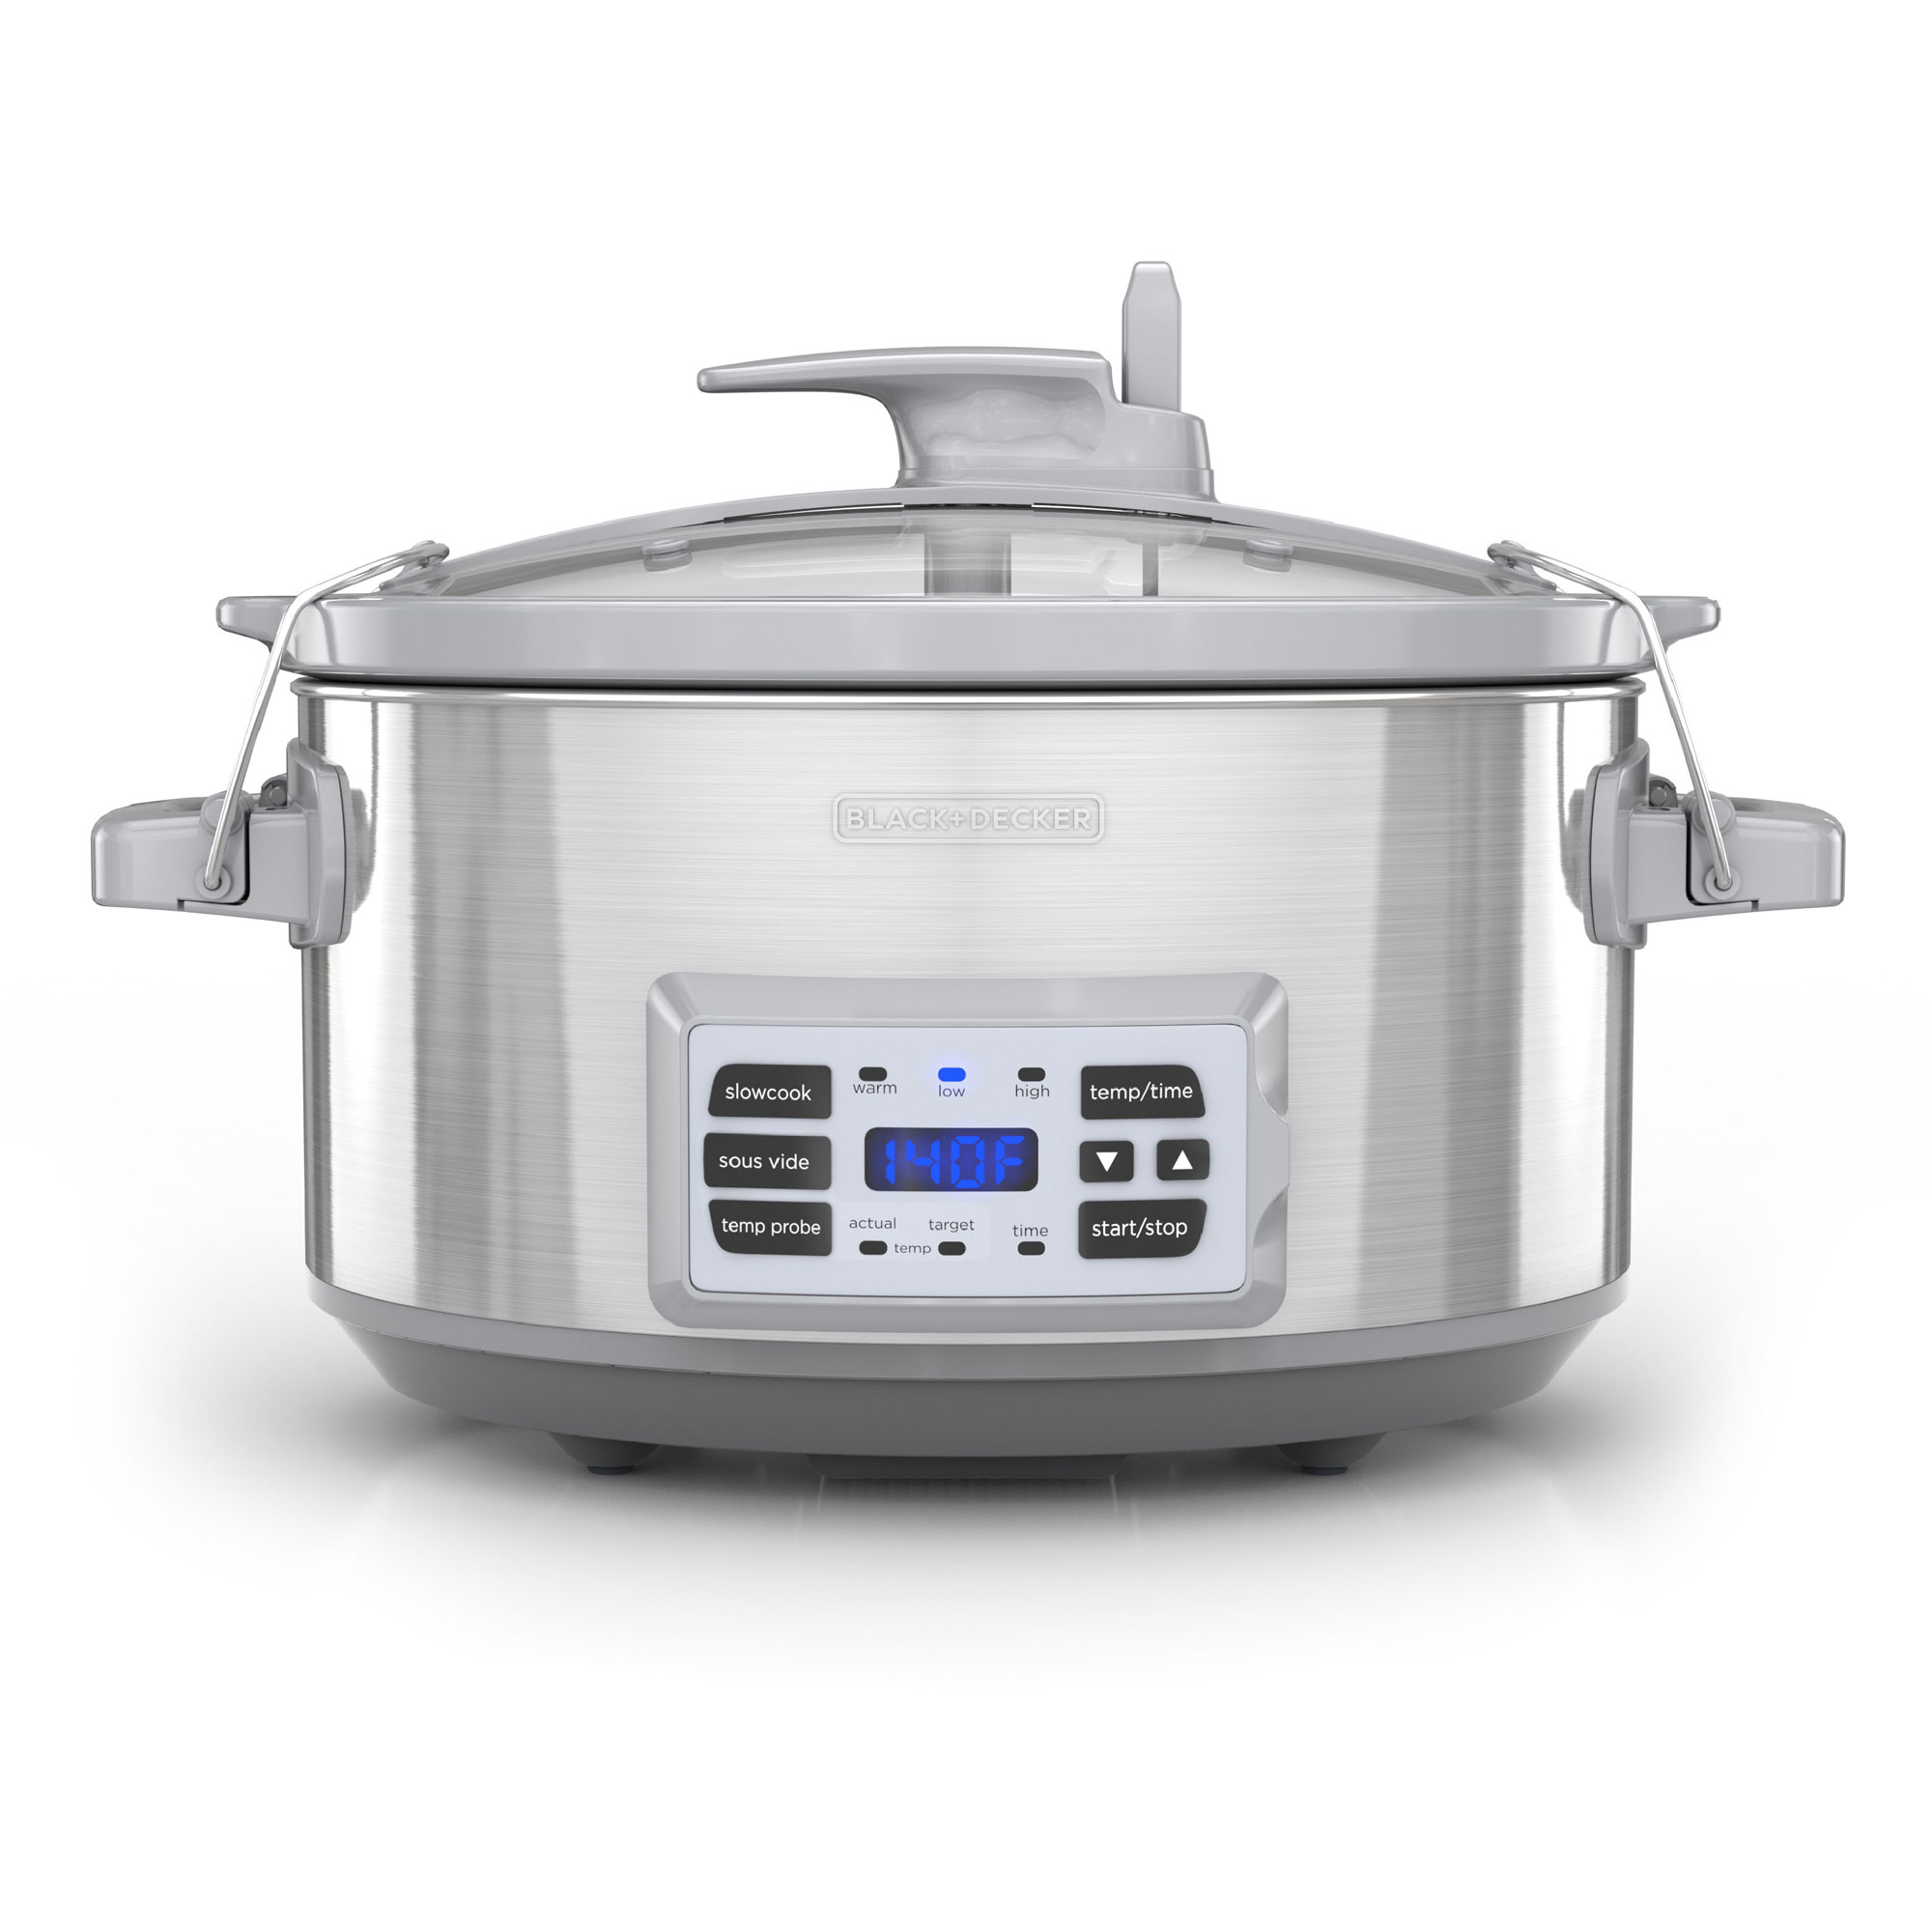 https://s7cdn.spectrumbrands.com/~/media/SmallAppliancesUS/Black%20and%20Decker/Product%20Page/cooking%20appliances/slow%20cookers%20and%20multicookers/SCD7007SSD/SCD7007SSD_02_Front_V2.jpg?h=2000&la=en&w=2000